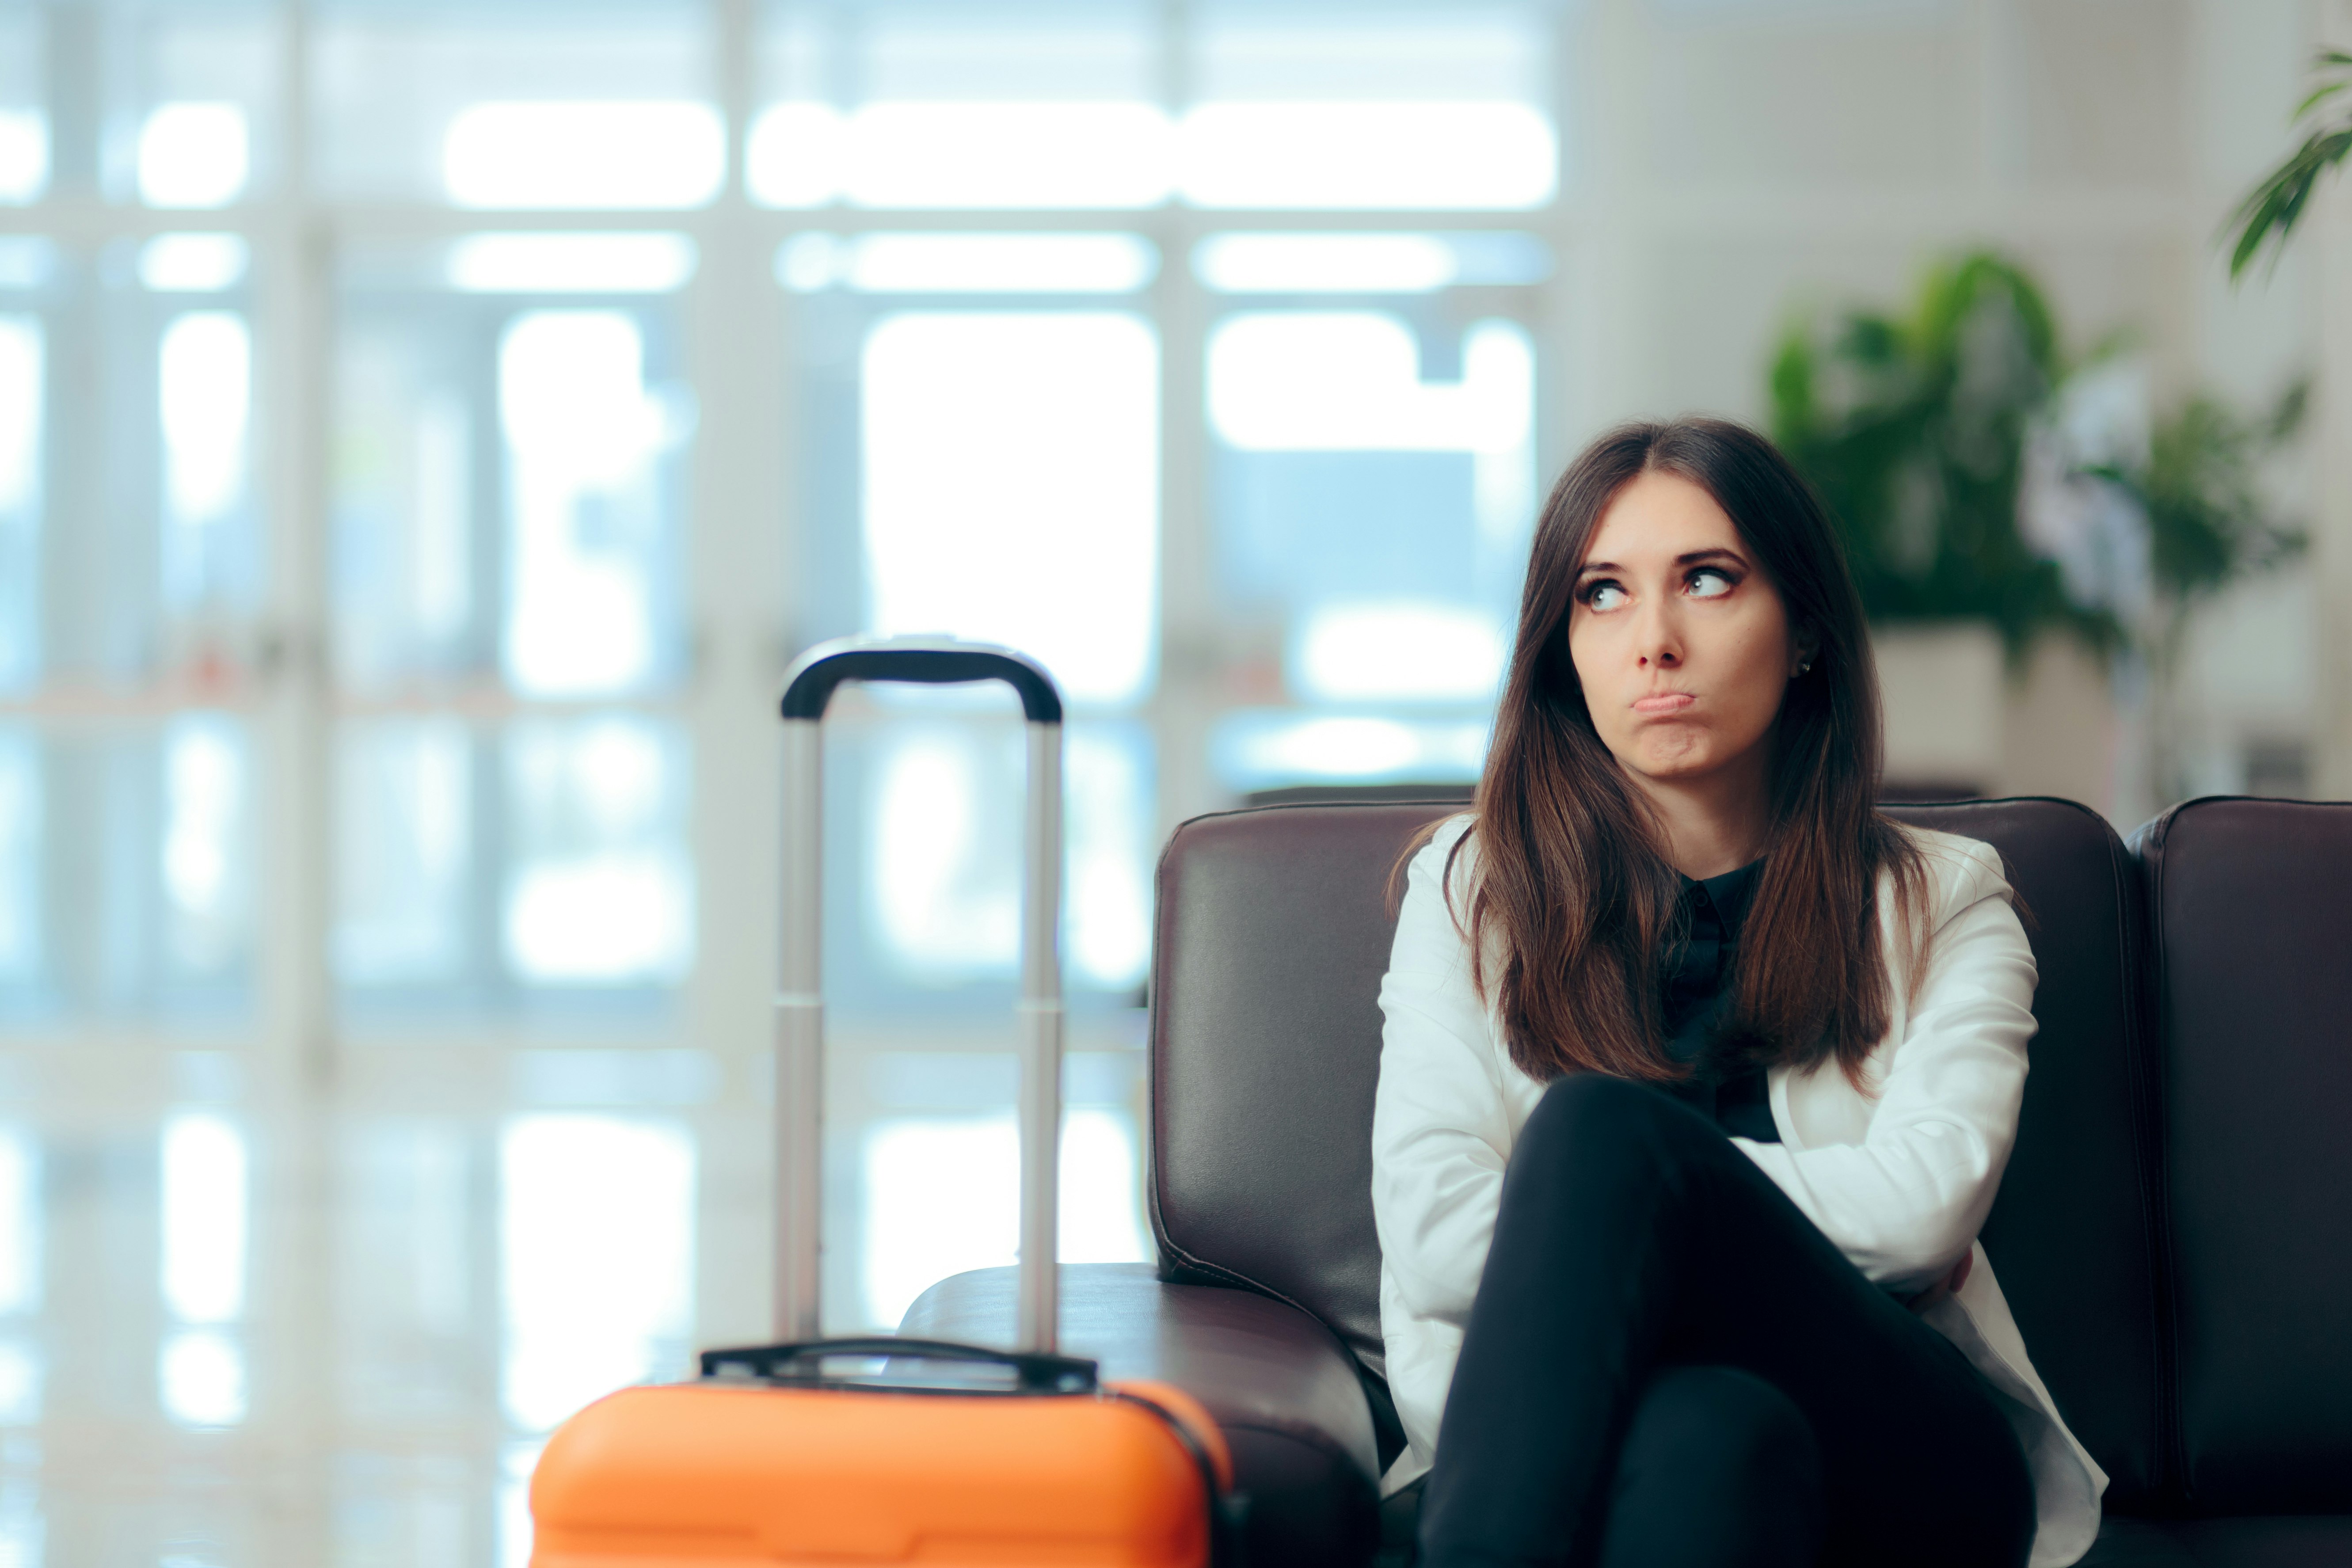 Anxious passenger sits beside her luggage